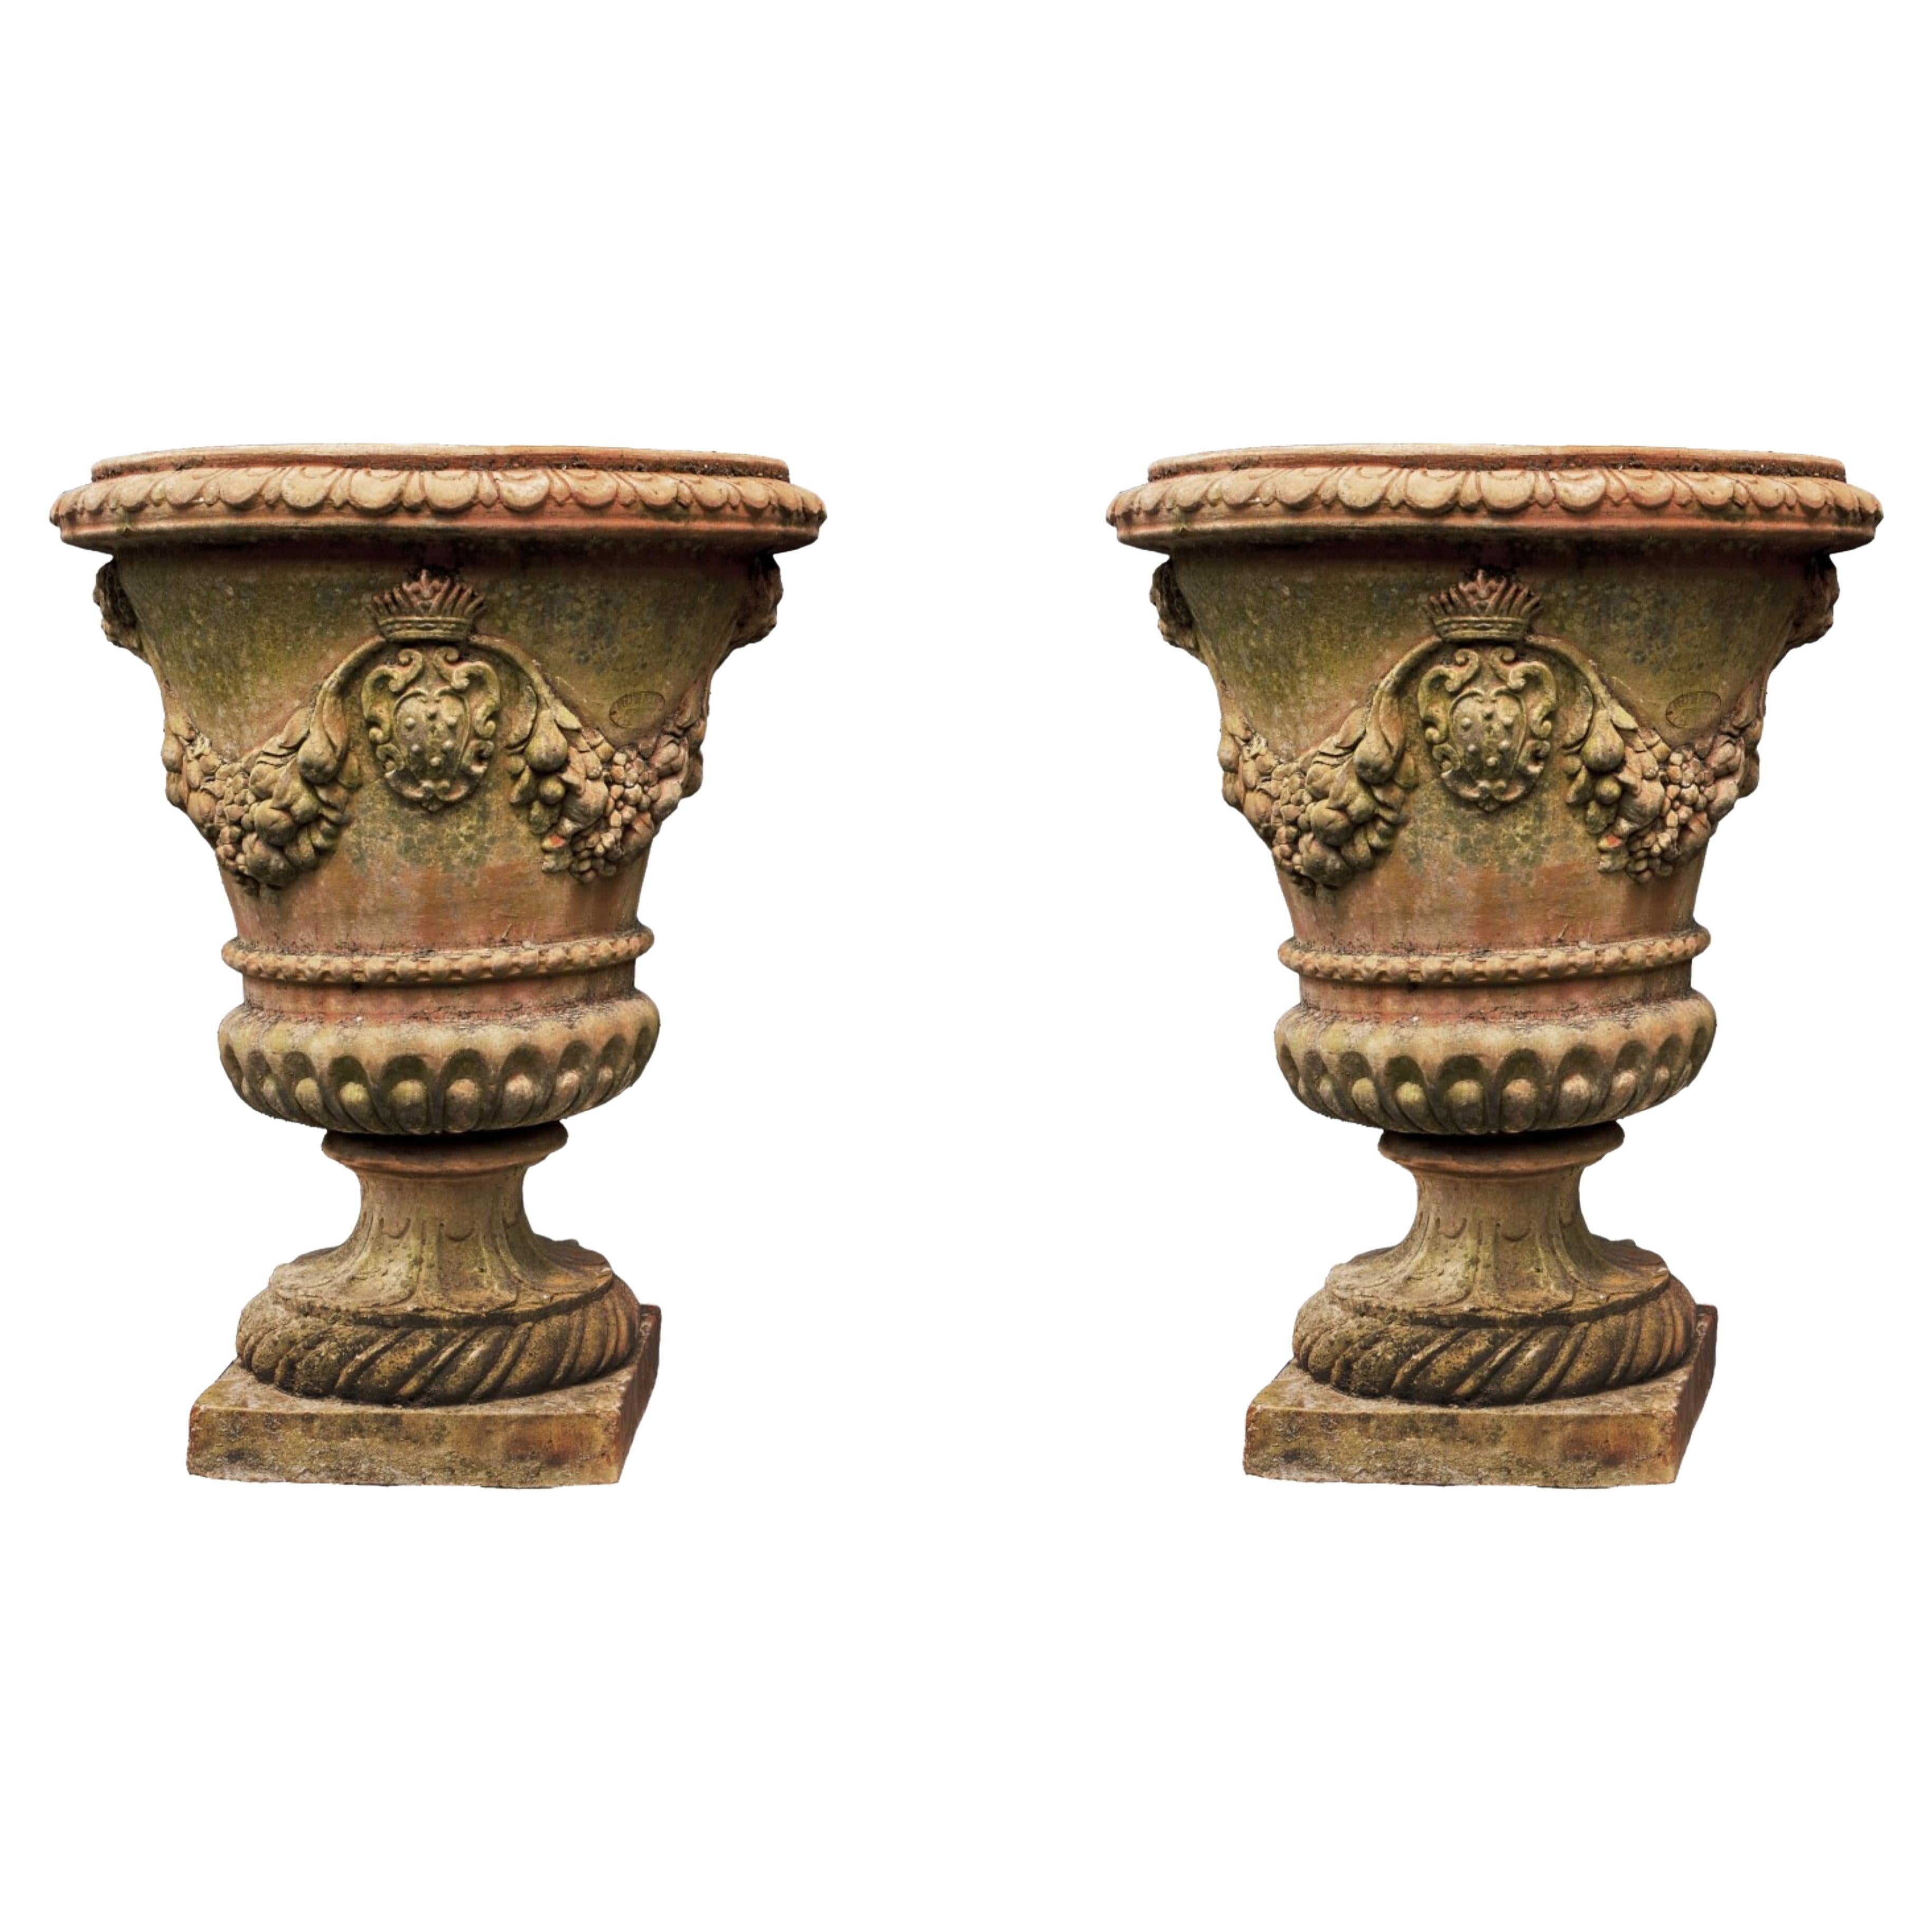 Pair of Large Terracotta Goblet Medicean Vases Early 20th Century For Sale